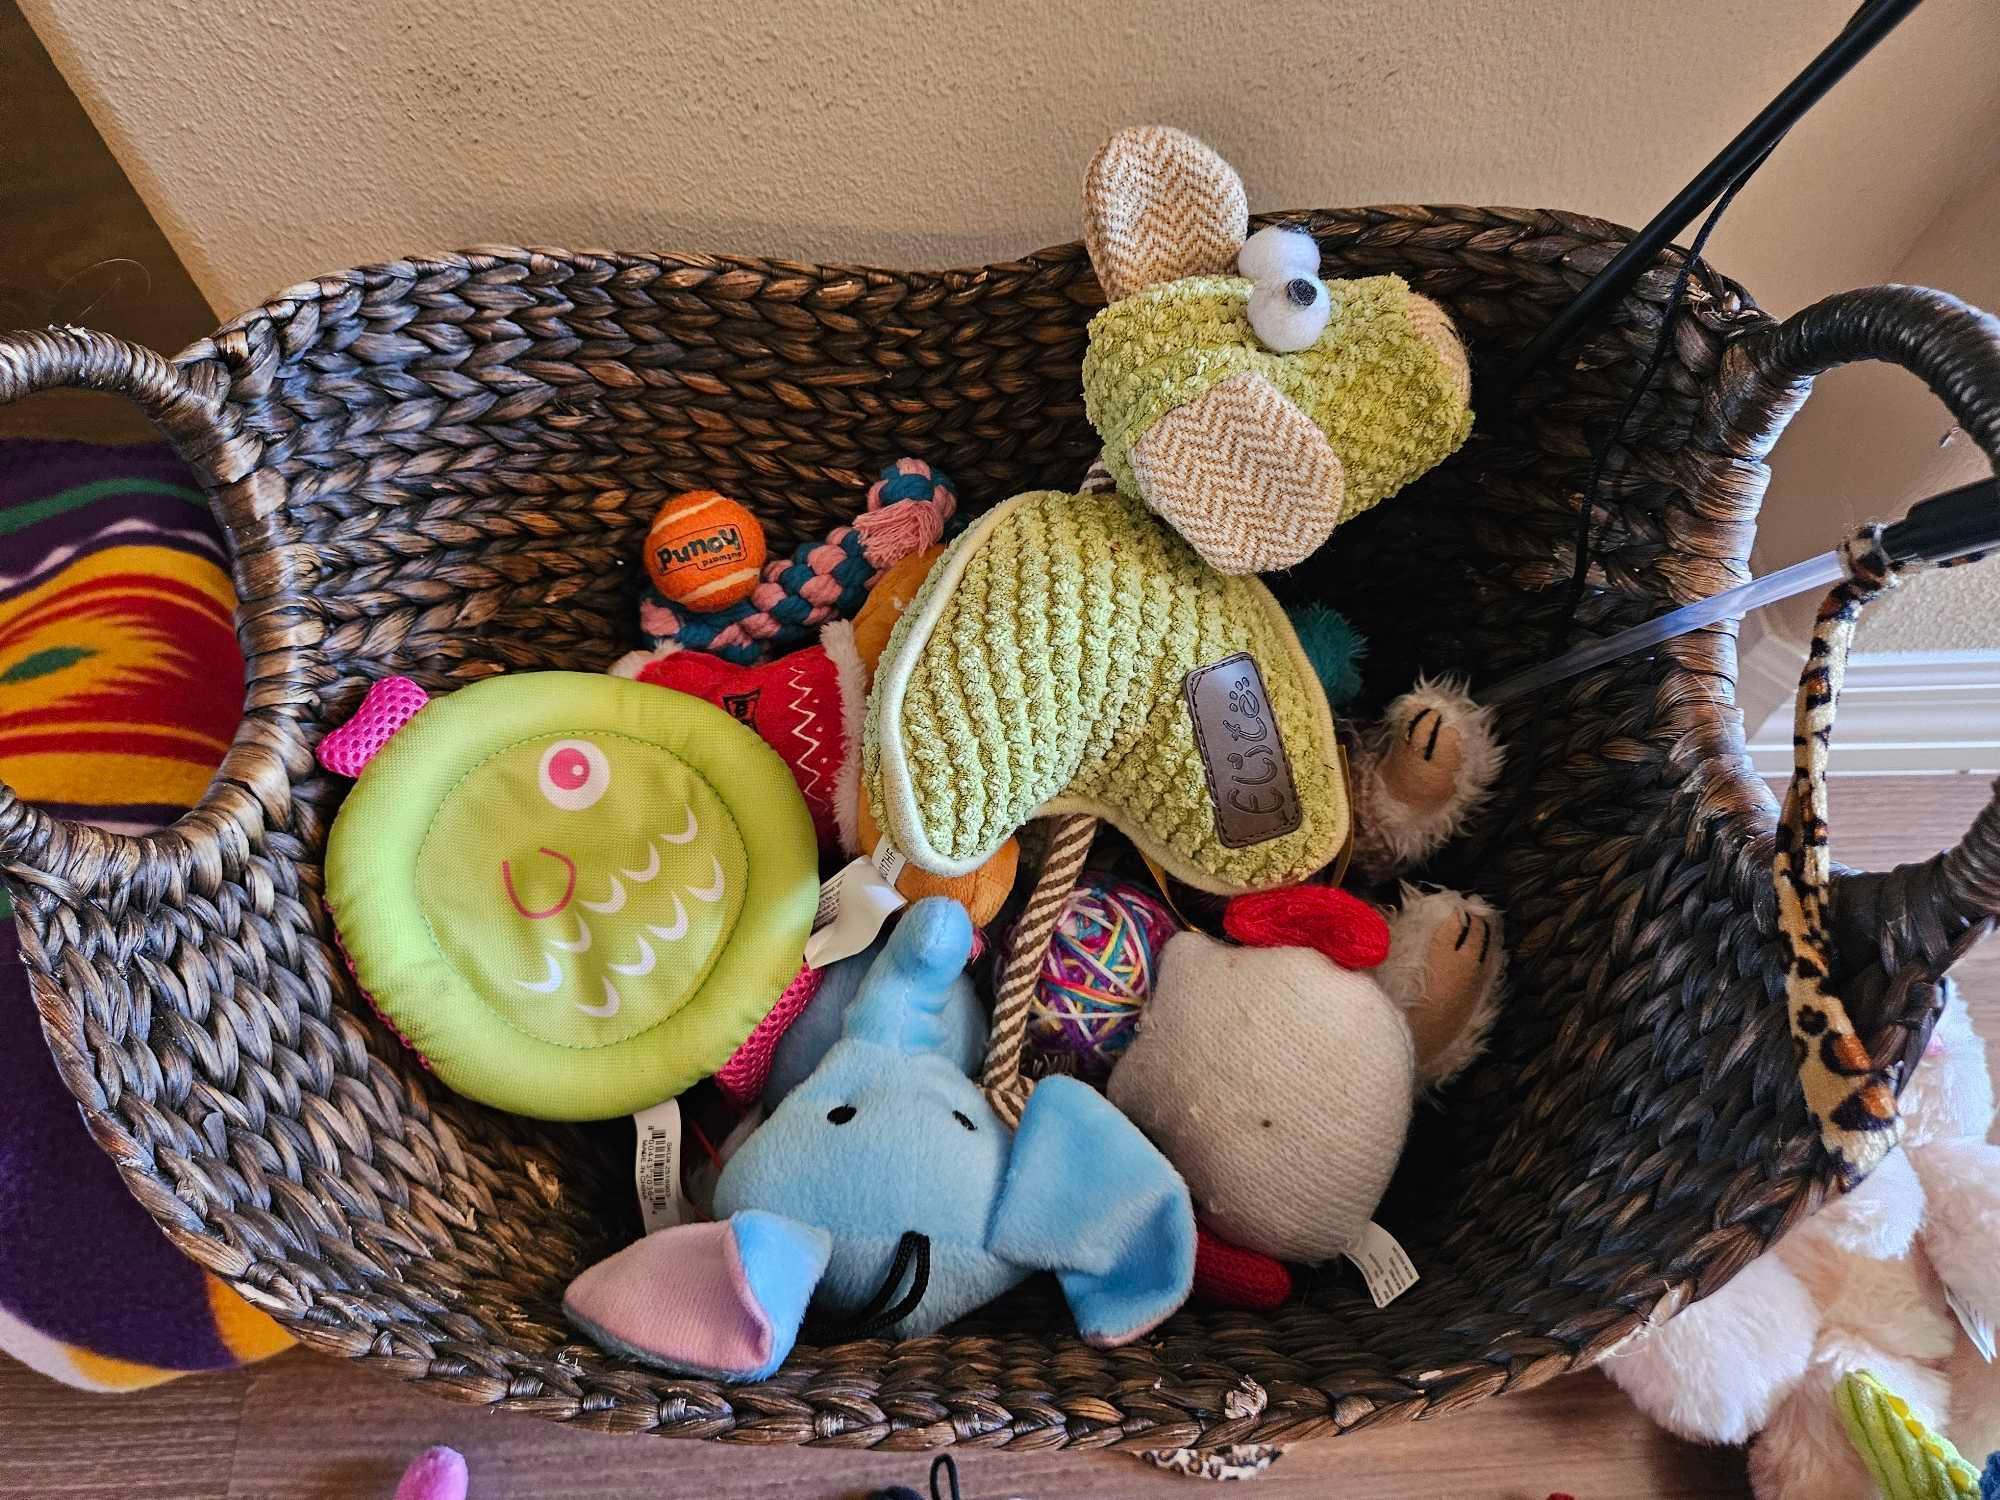 Your Furry Friend will LOVE THIS! Basket of Dog TOYS!